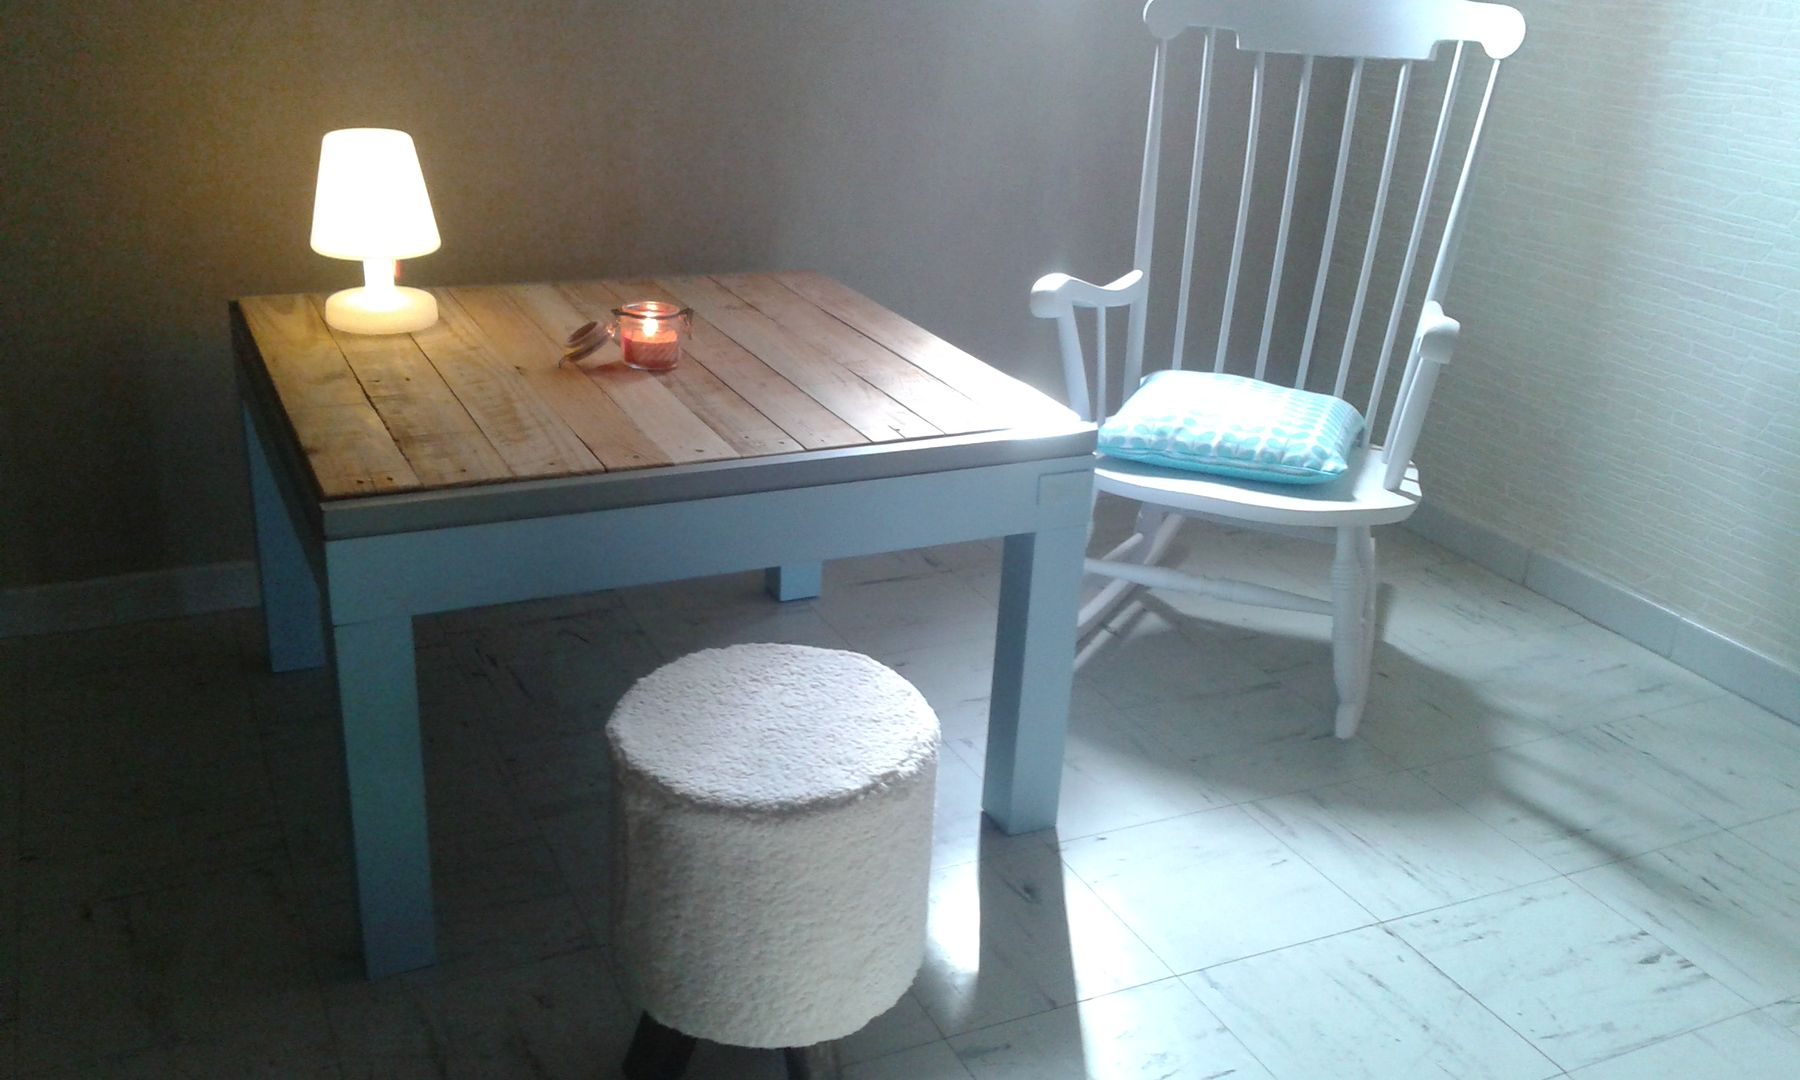 Table basse "style scandinave", amour de palette création amour de palette création ห้องนั่งเล่น ไม้ Wood effect โต๊ะกลางและโซฟา